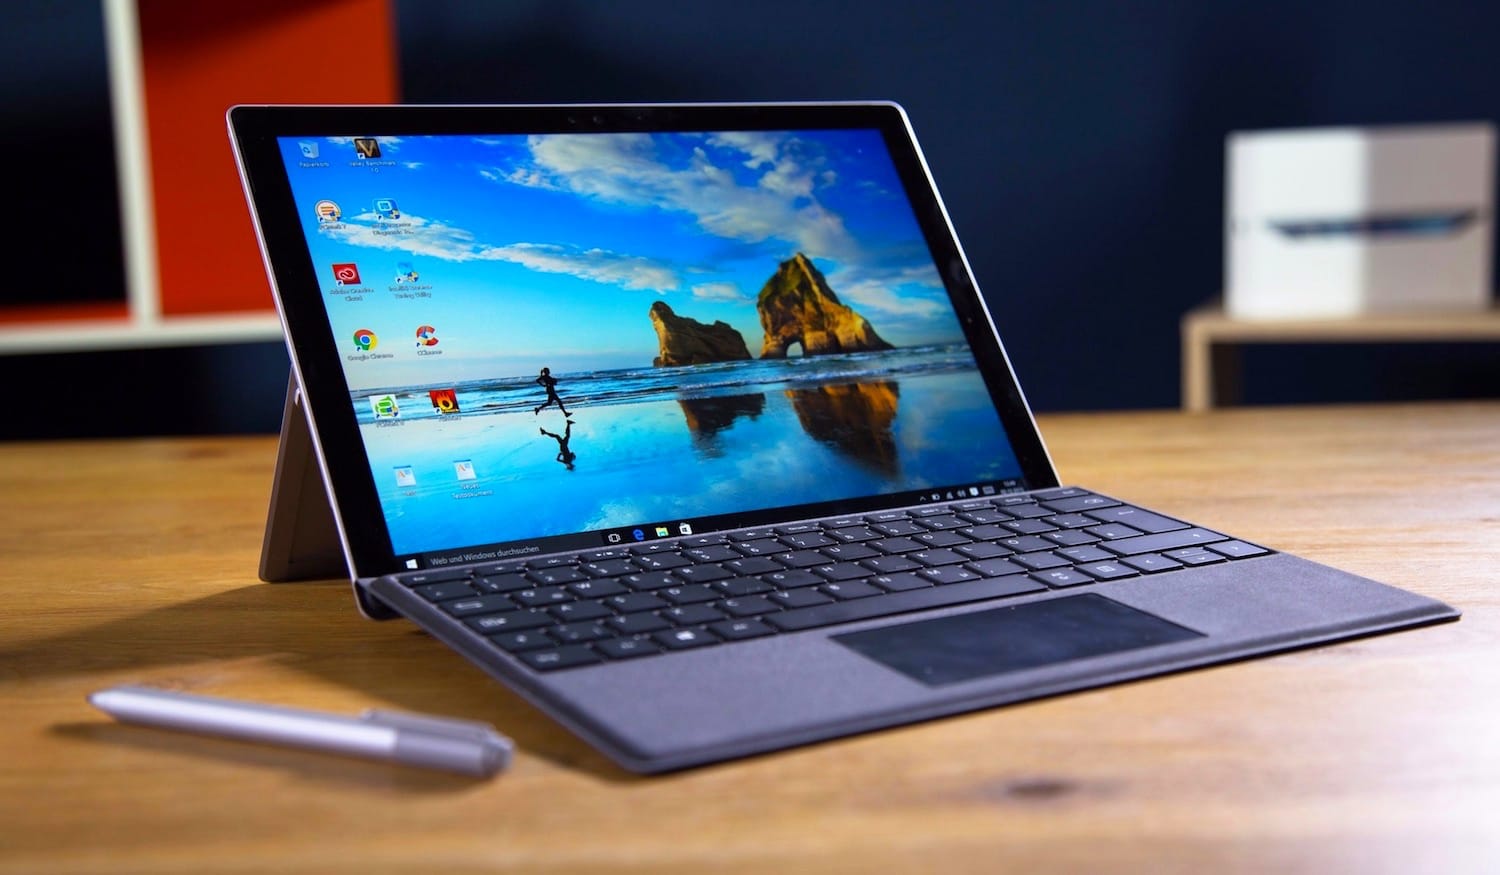 Microsoft will replace Surface Pro 4 with a flickering screen for free